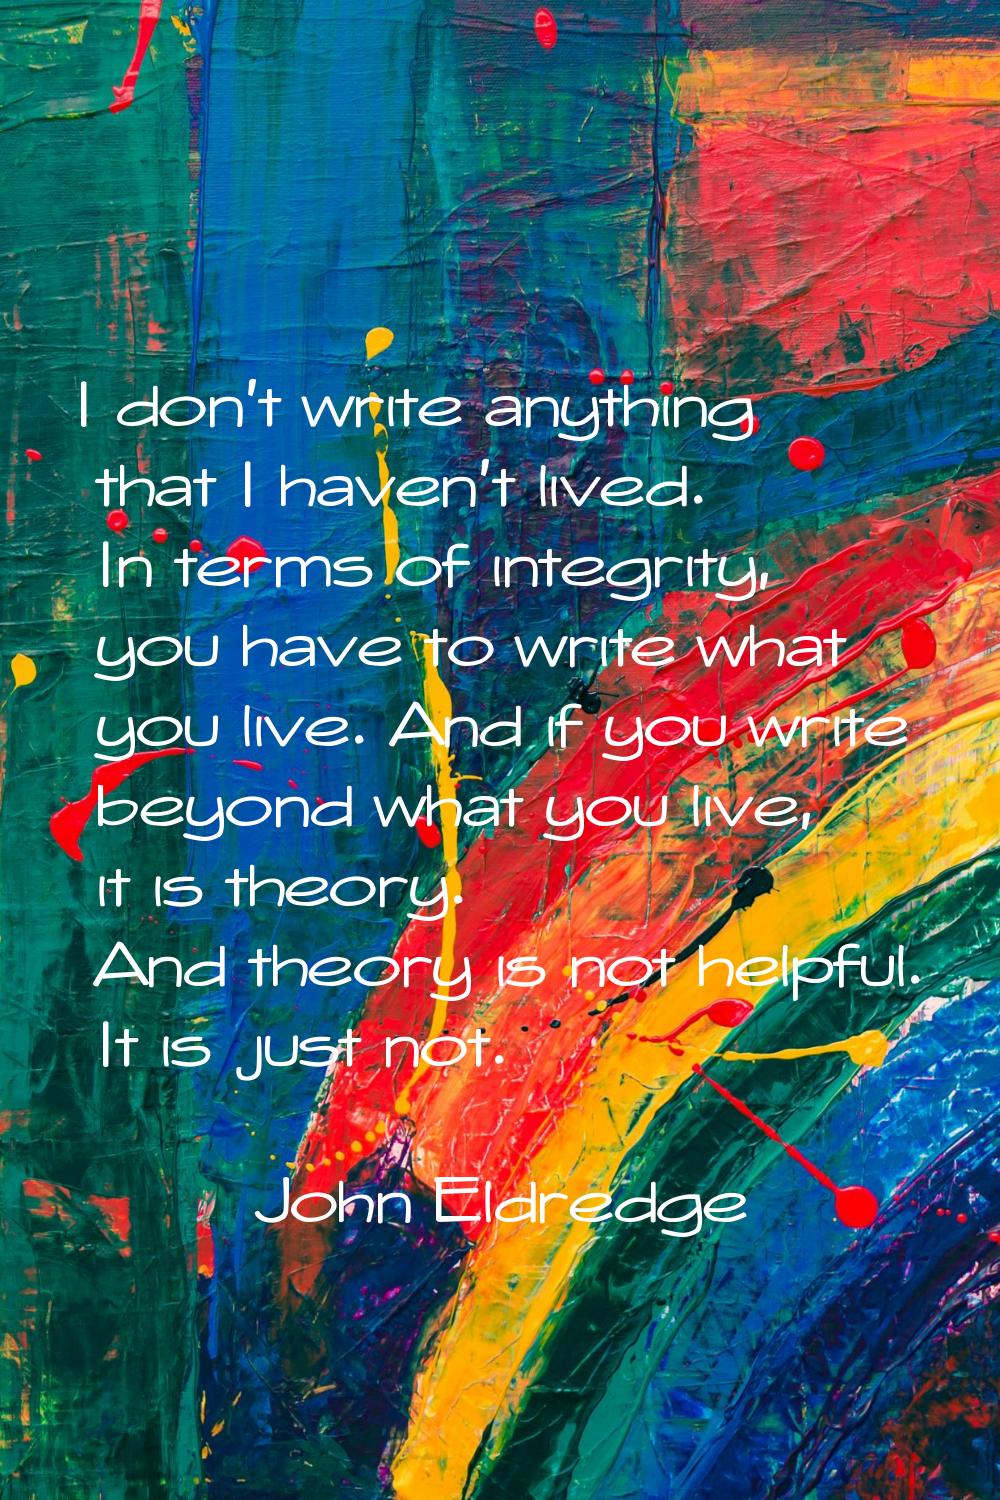 I don't write anything that I haven't lived. In terms of integrity, you have to write what you live